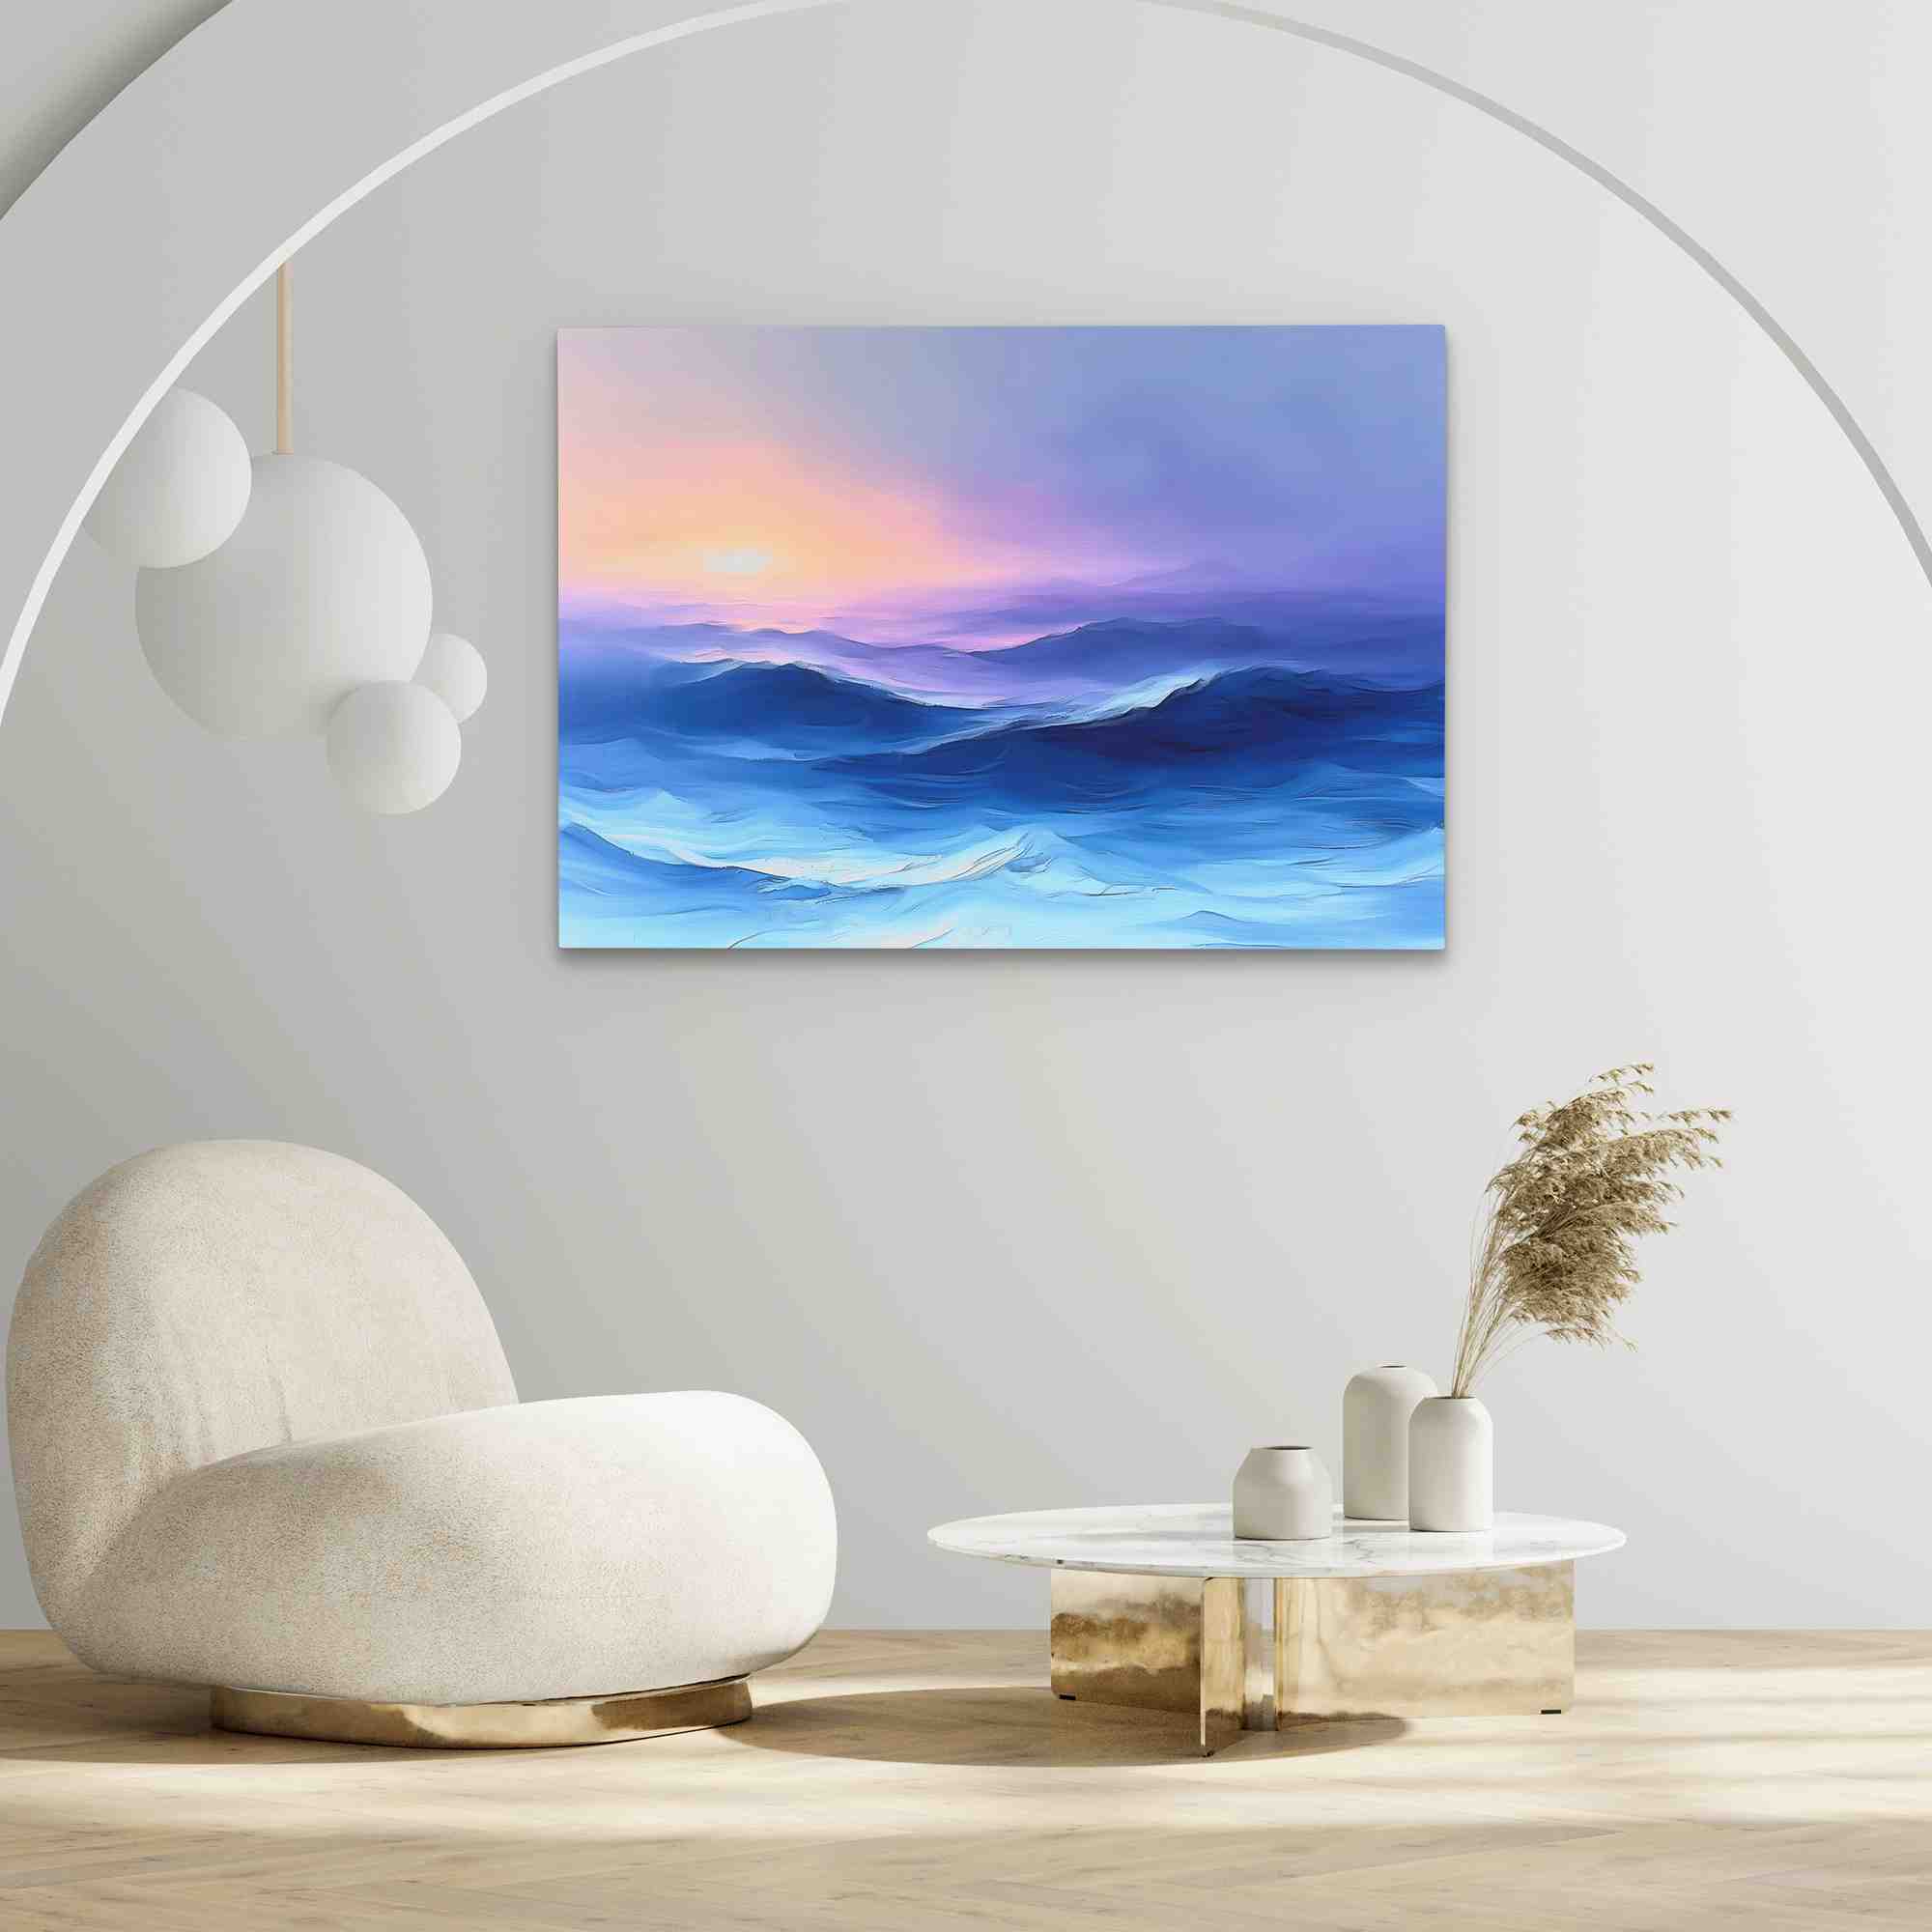 a painting of a blue ocean with a sunset in the background